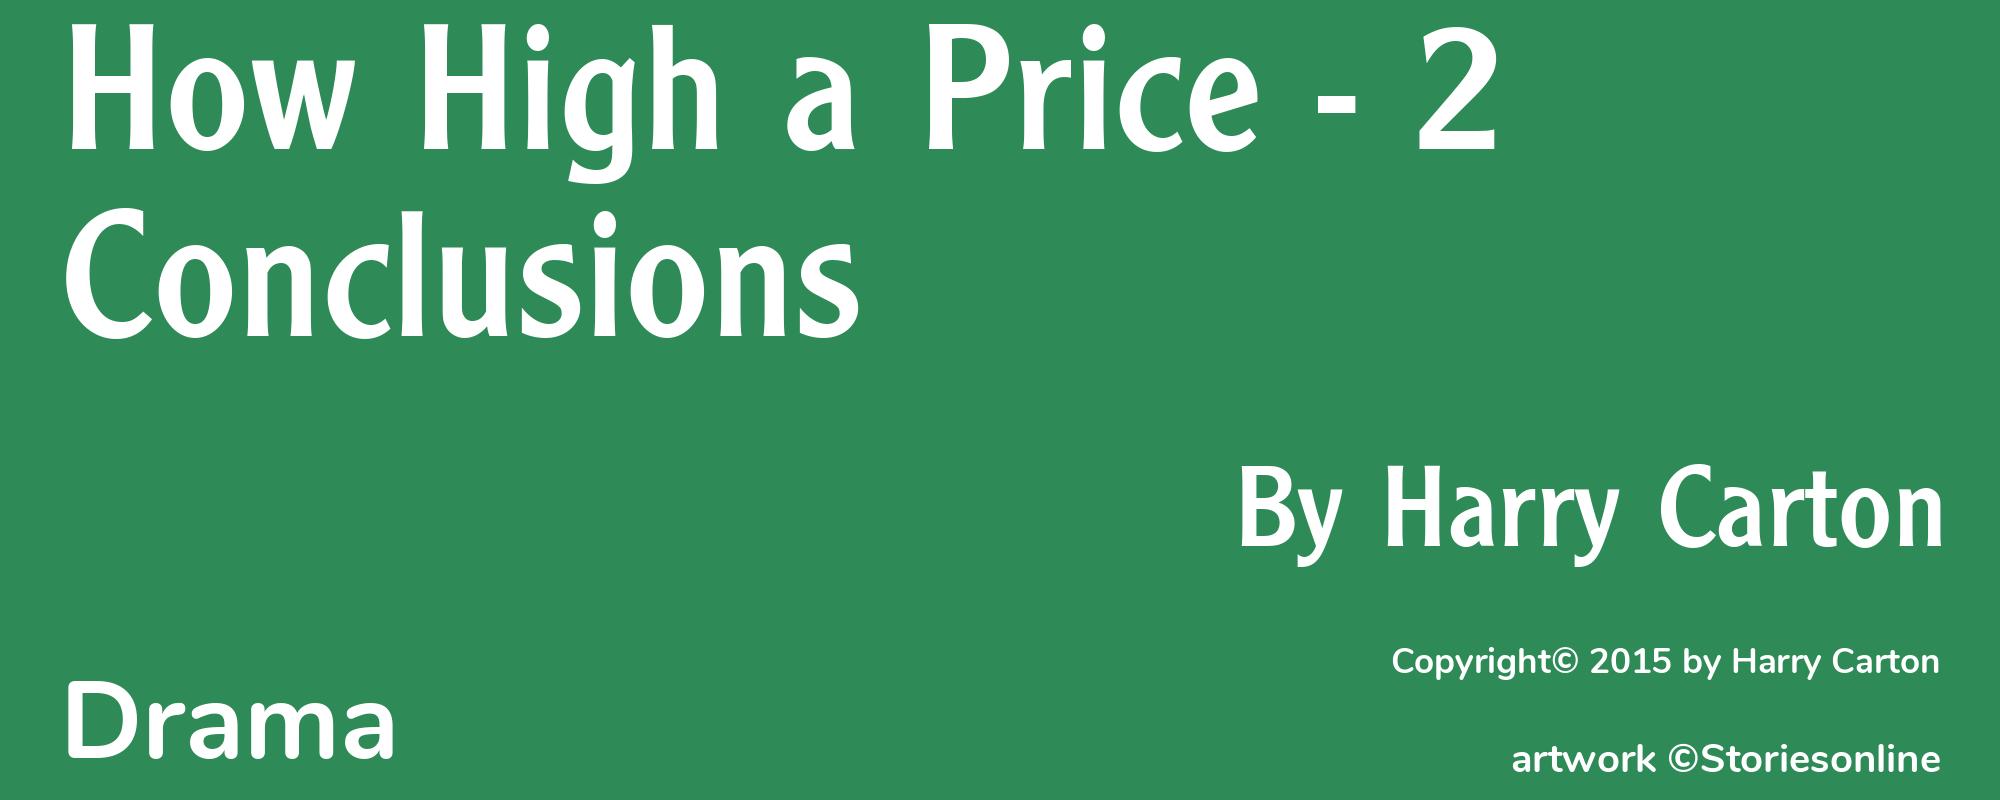 How High a Price - 2 Conclusions - Cover